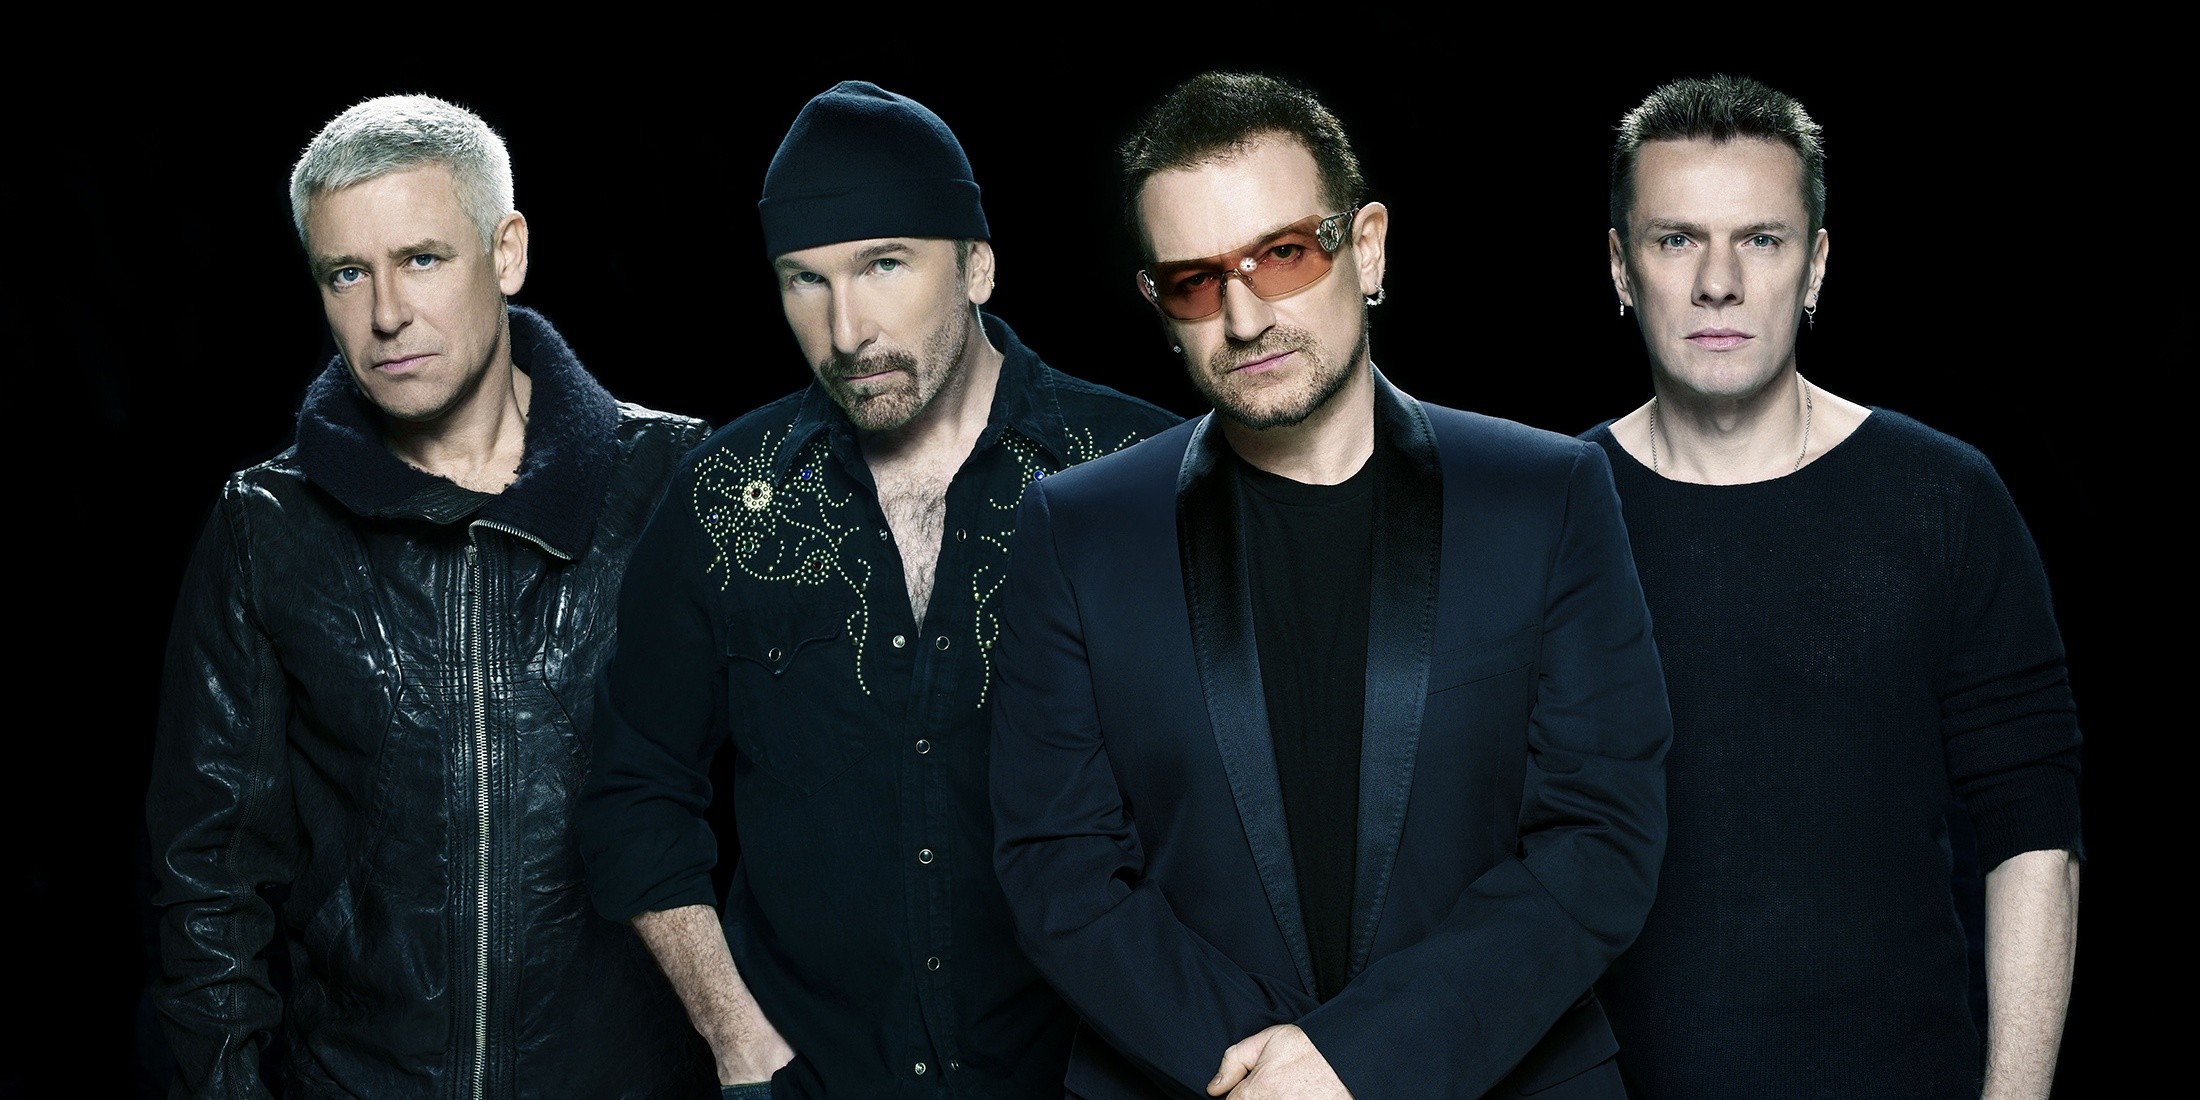 Hold up, are U2 coming to Singapore?